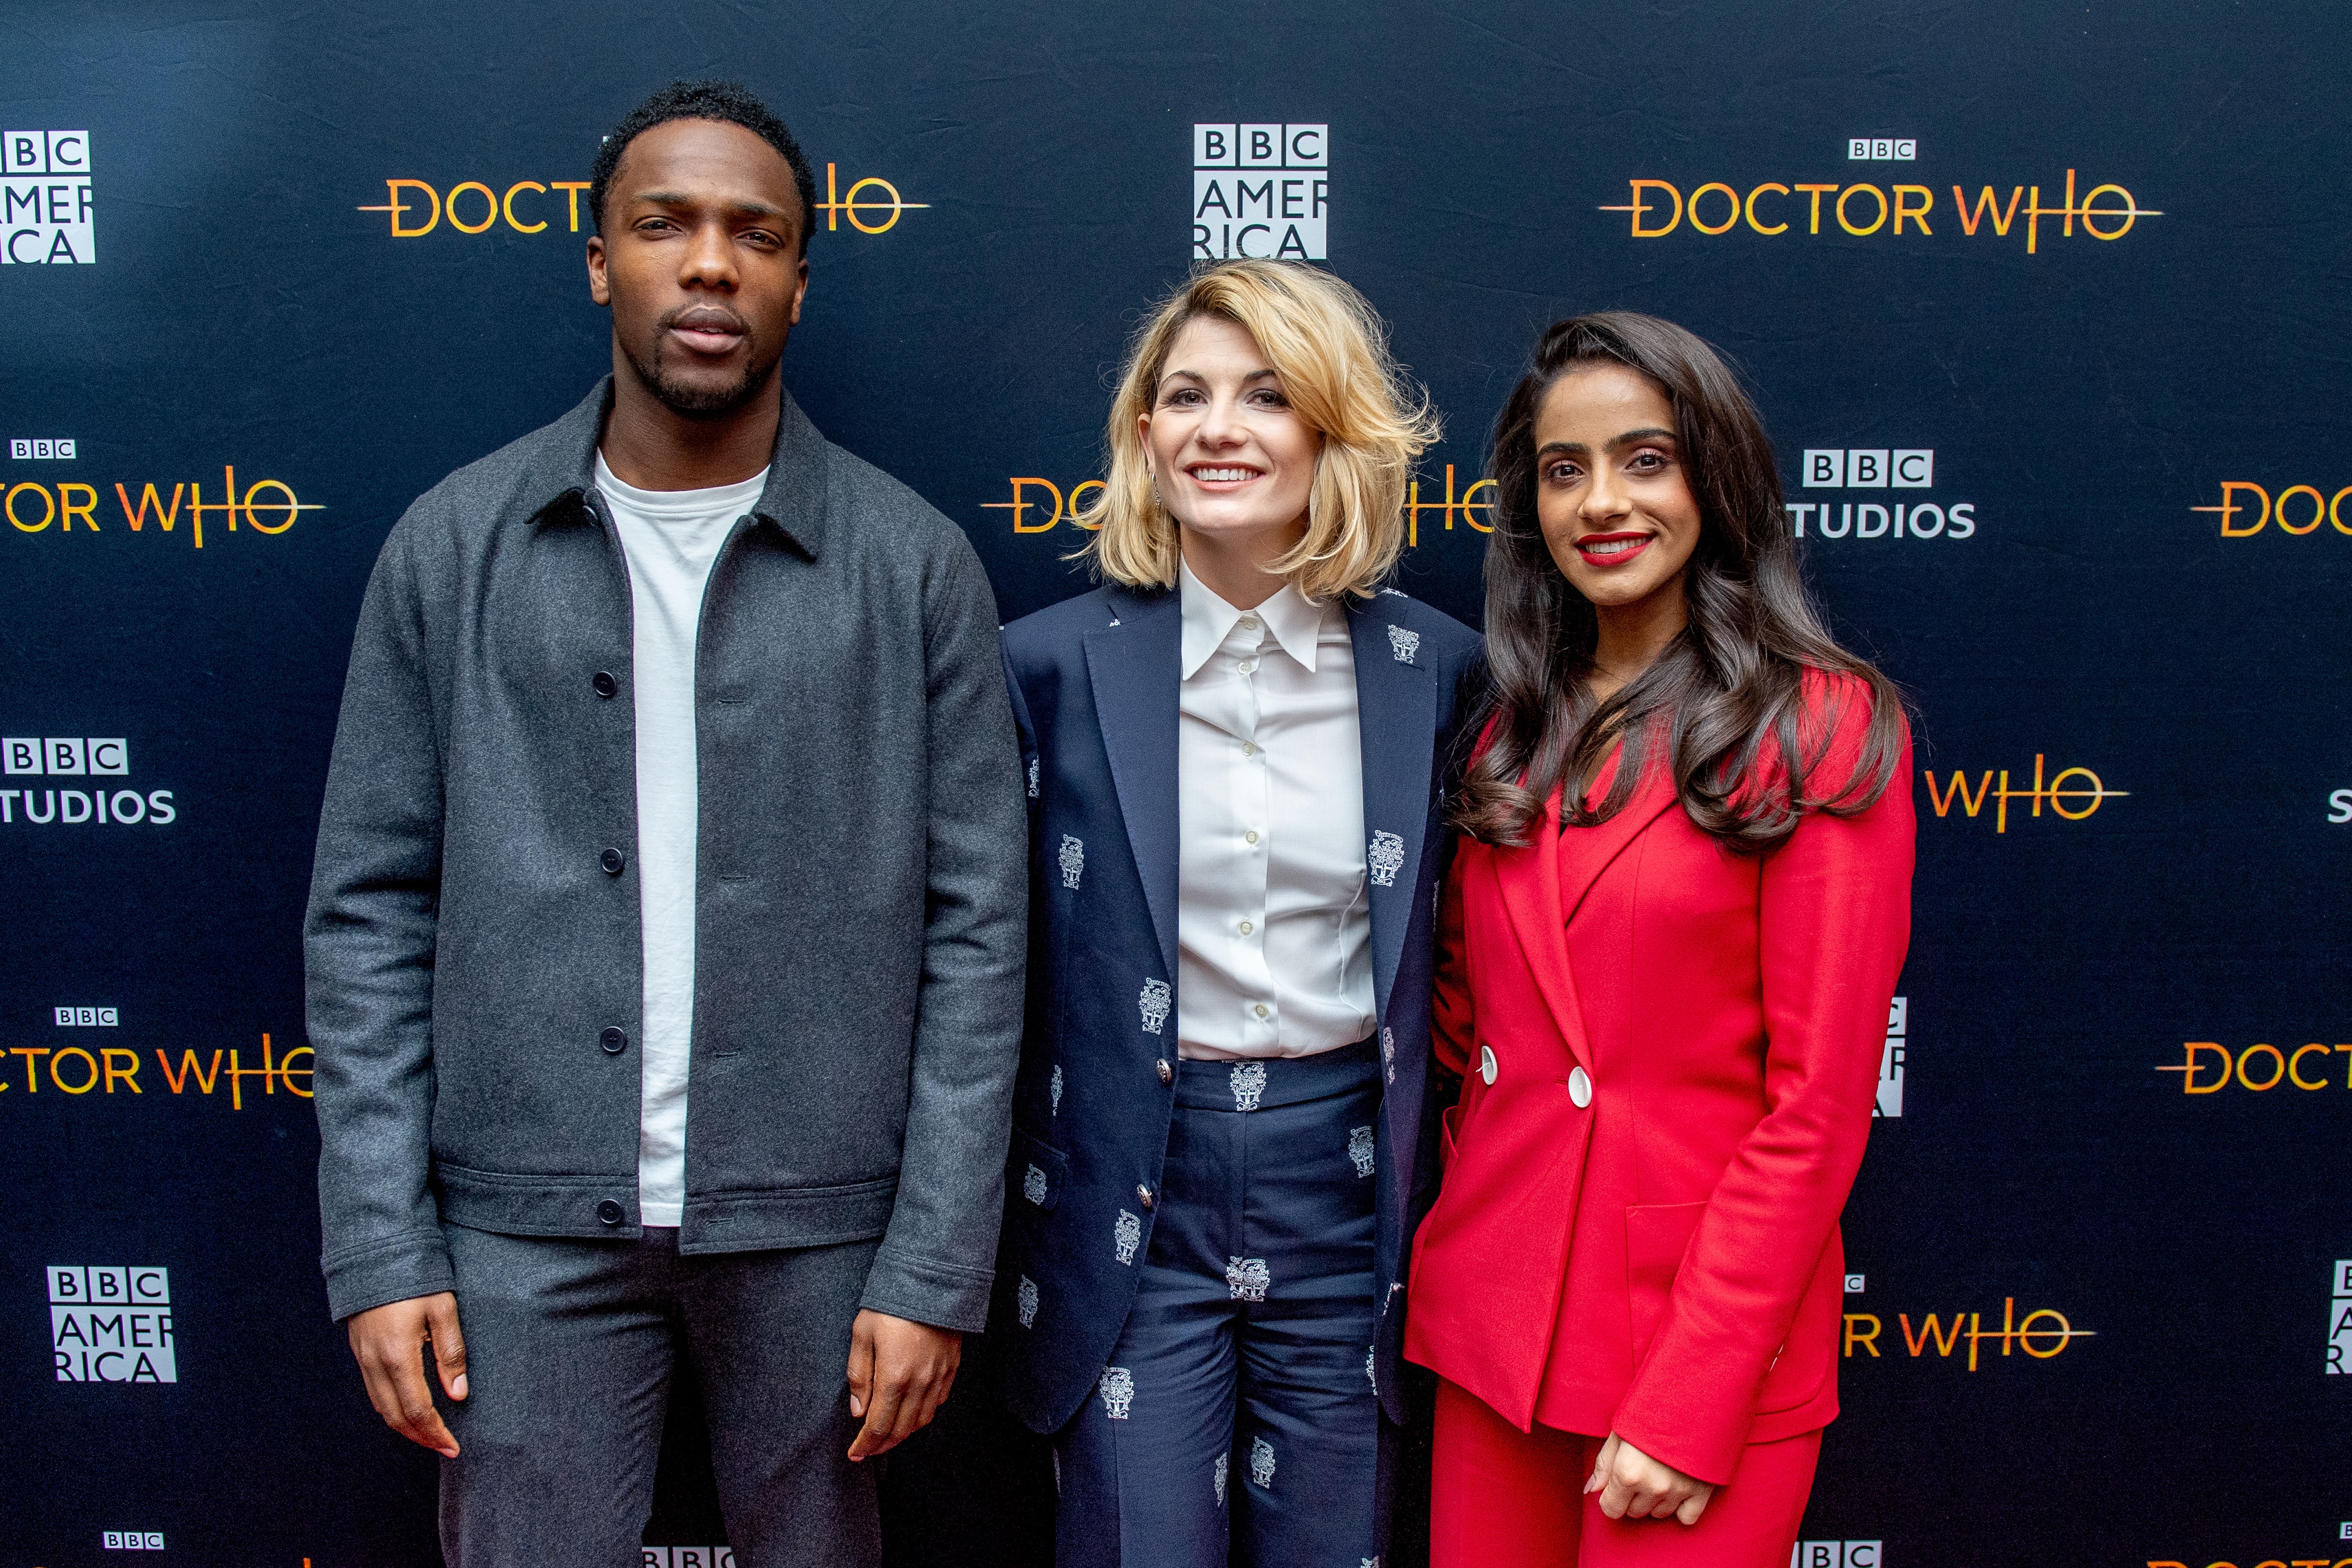 Jodie Whittaker, Mandip Gill, Tosin Cole (Doctor Who)